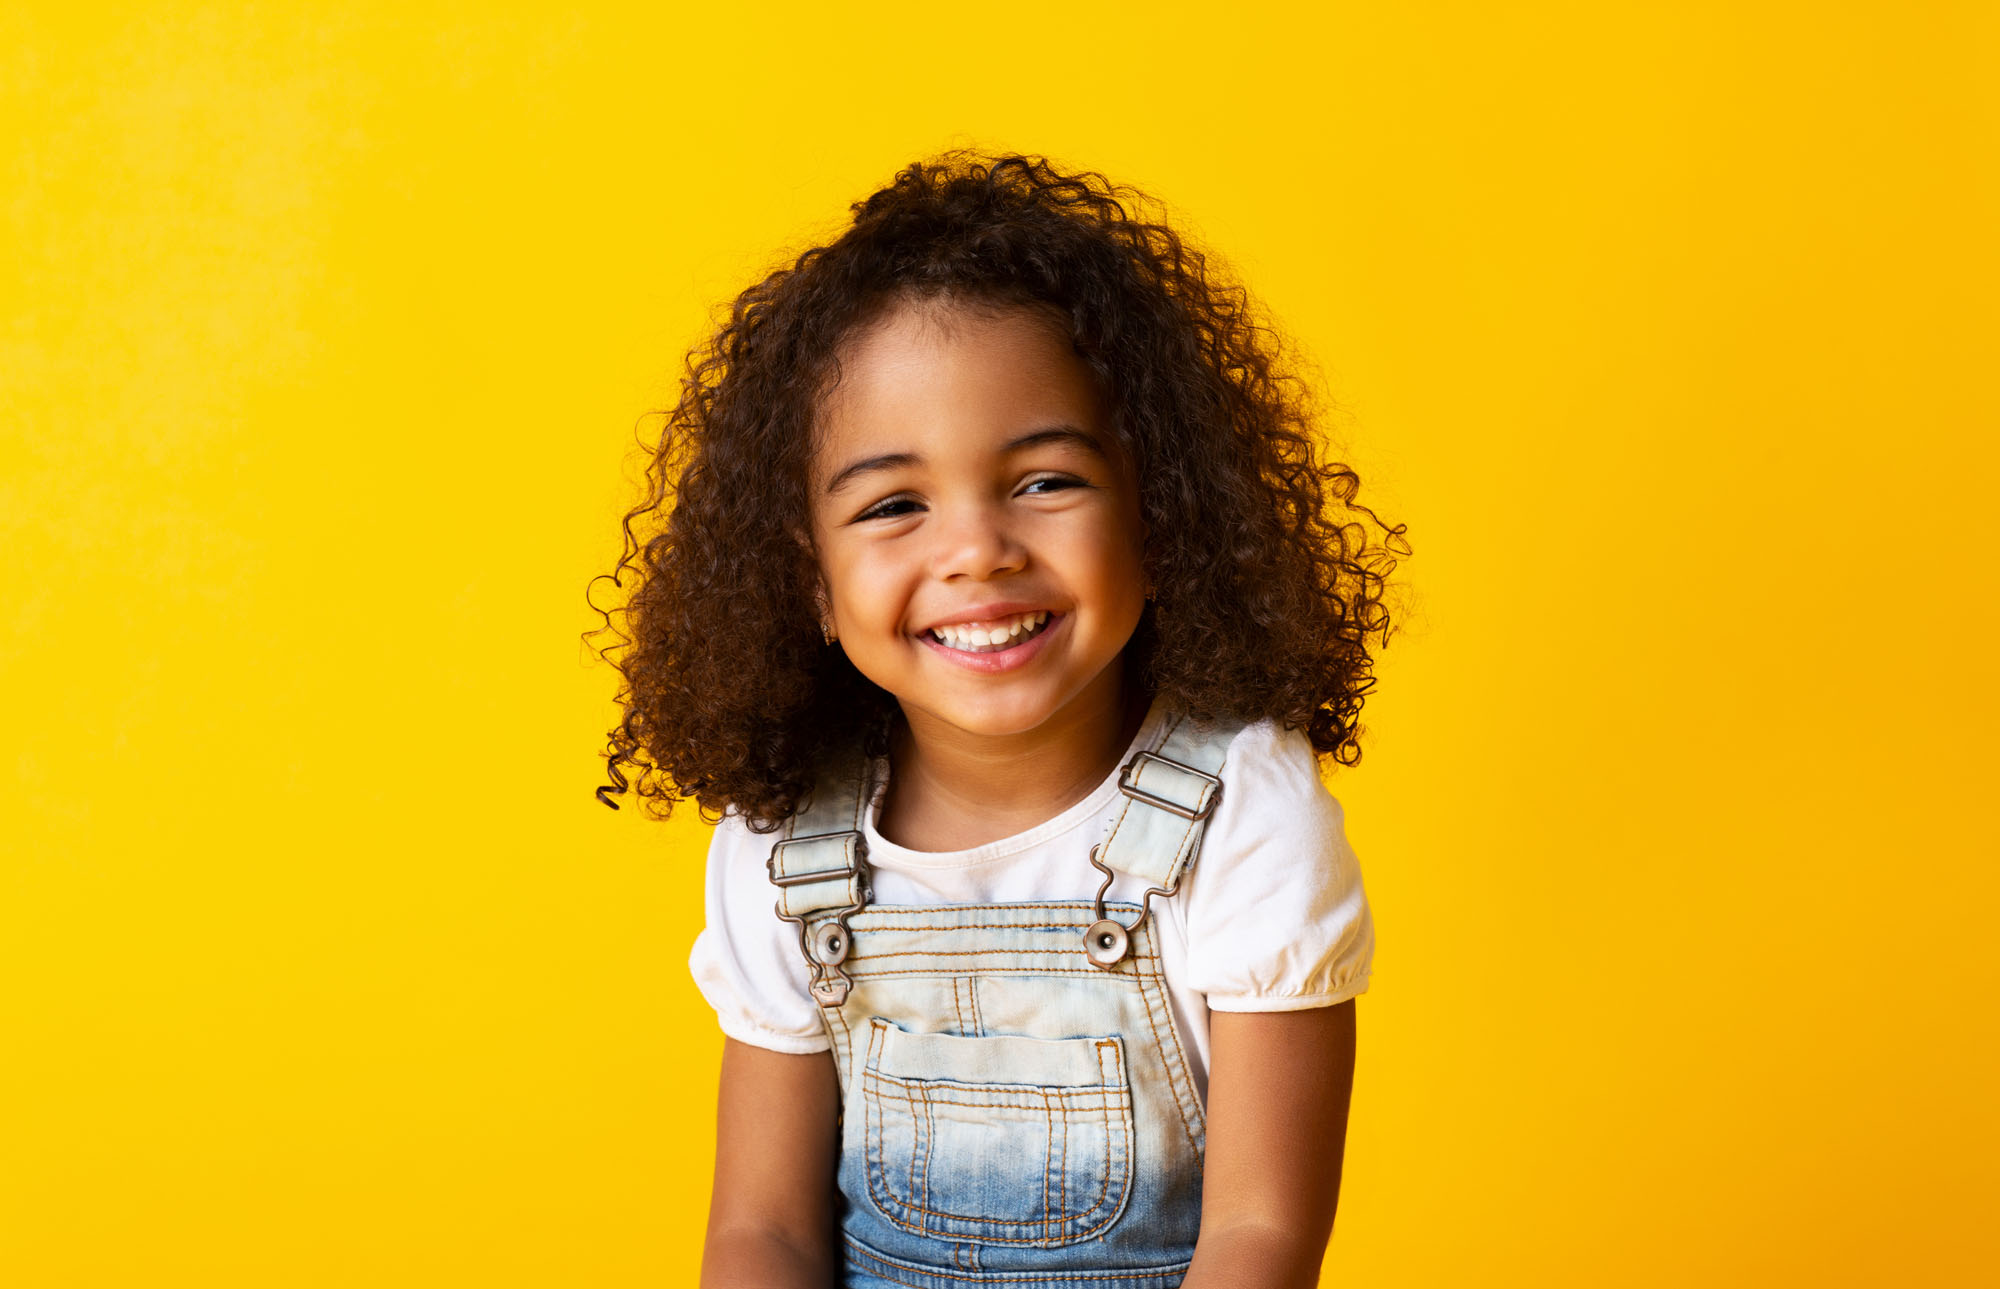 Young girl smiling after a teeth cleaning | Children's Dentistry of Elko